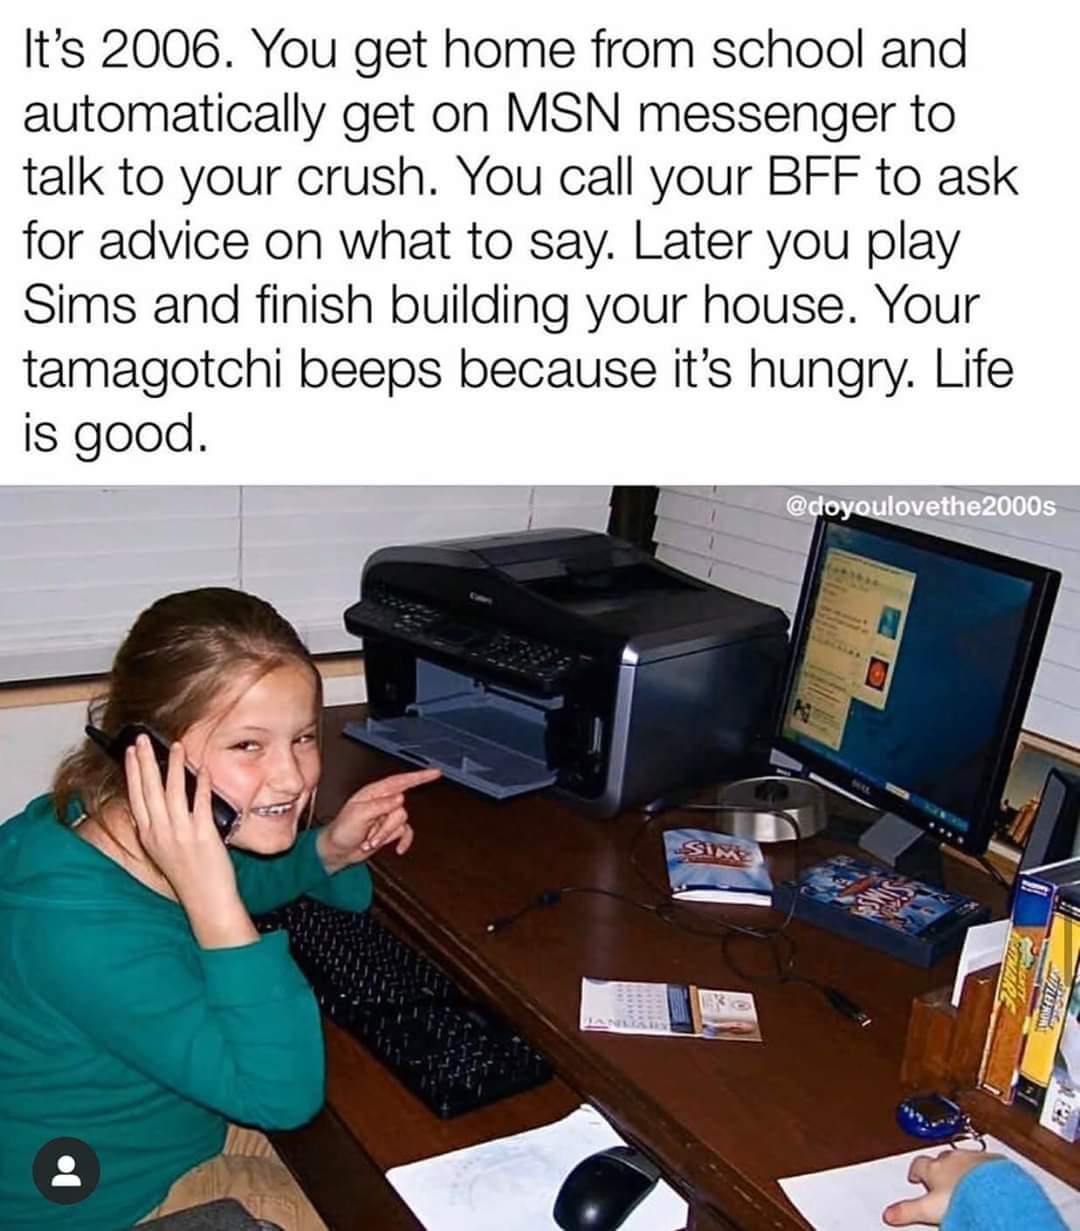 communication - It's 2006. You get home from school and automatically get on Msn messenger to talk to your crush. You call your Bff to ask for advice on what to say. Later you play Sims and finish building your house. Your tamagotchi beeps because it's hu